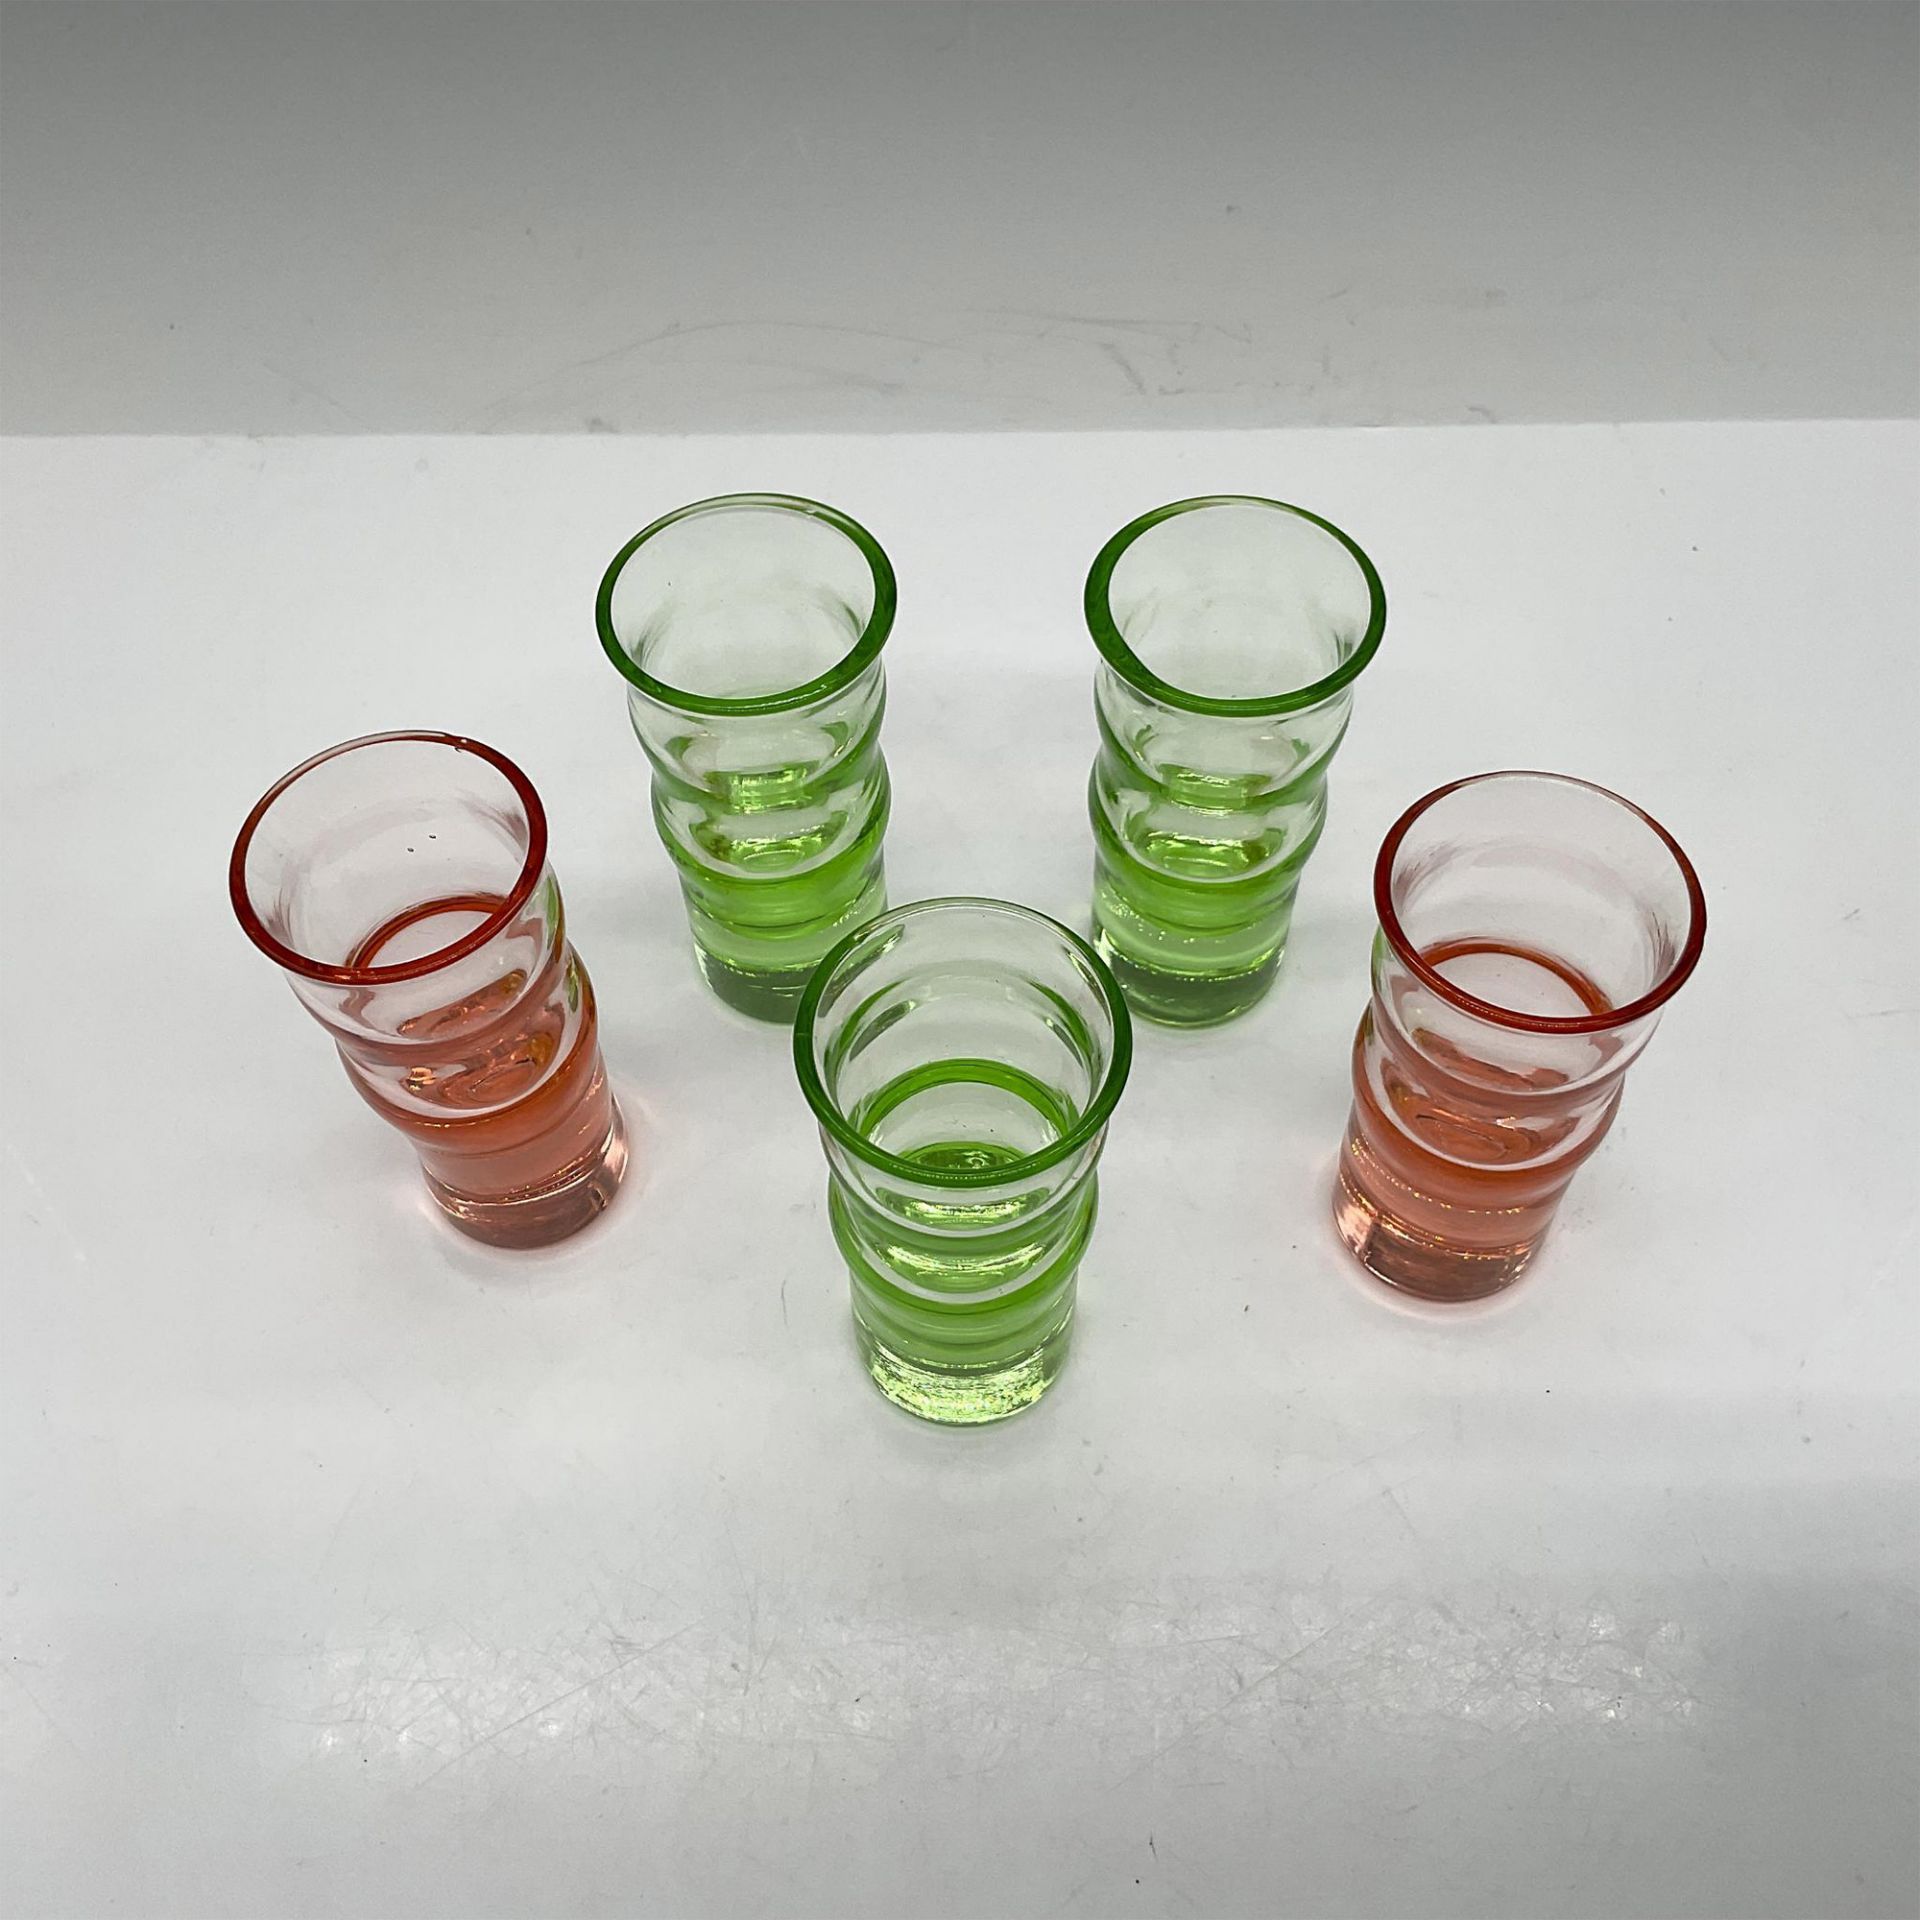 5pc Vintage Art Deco Style Colored Shot Glasses - Image 2 of 3